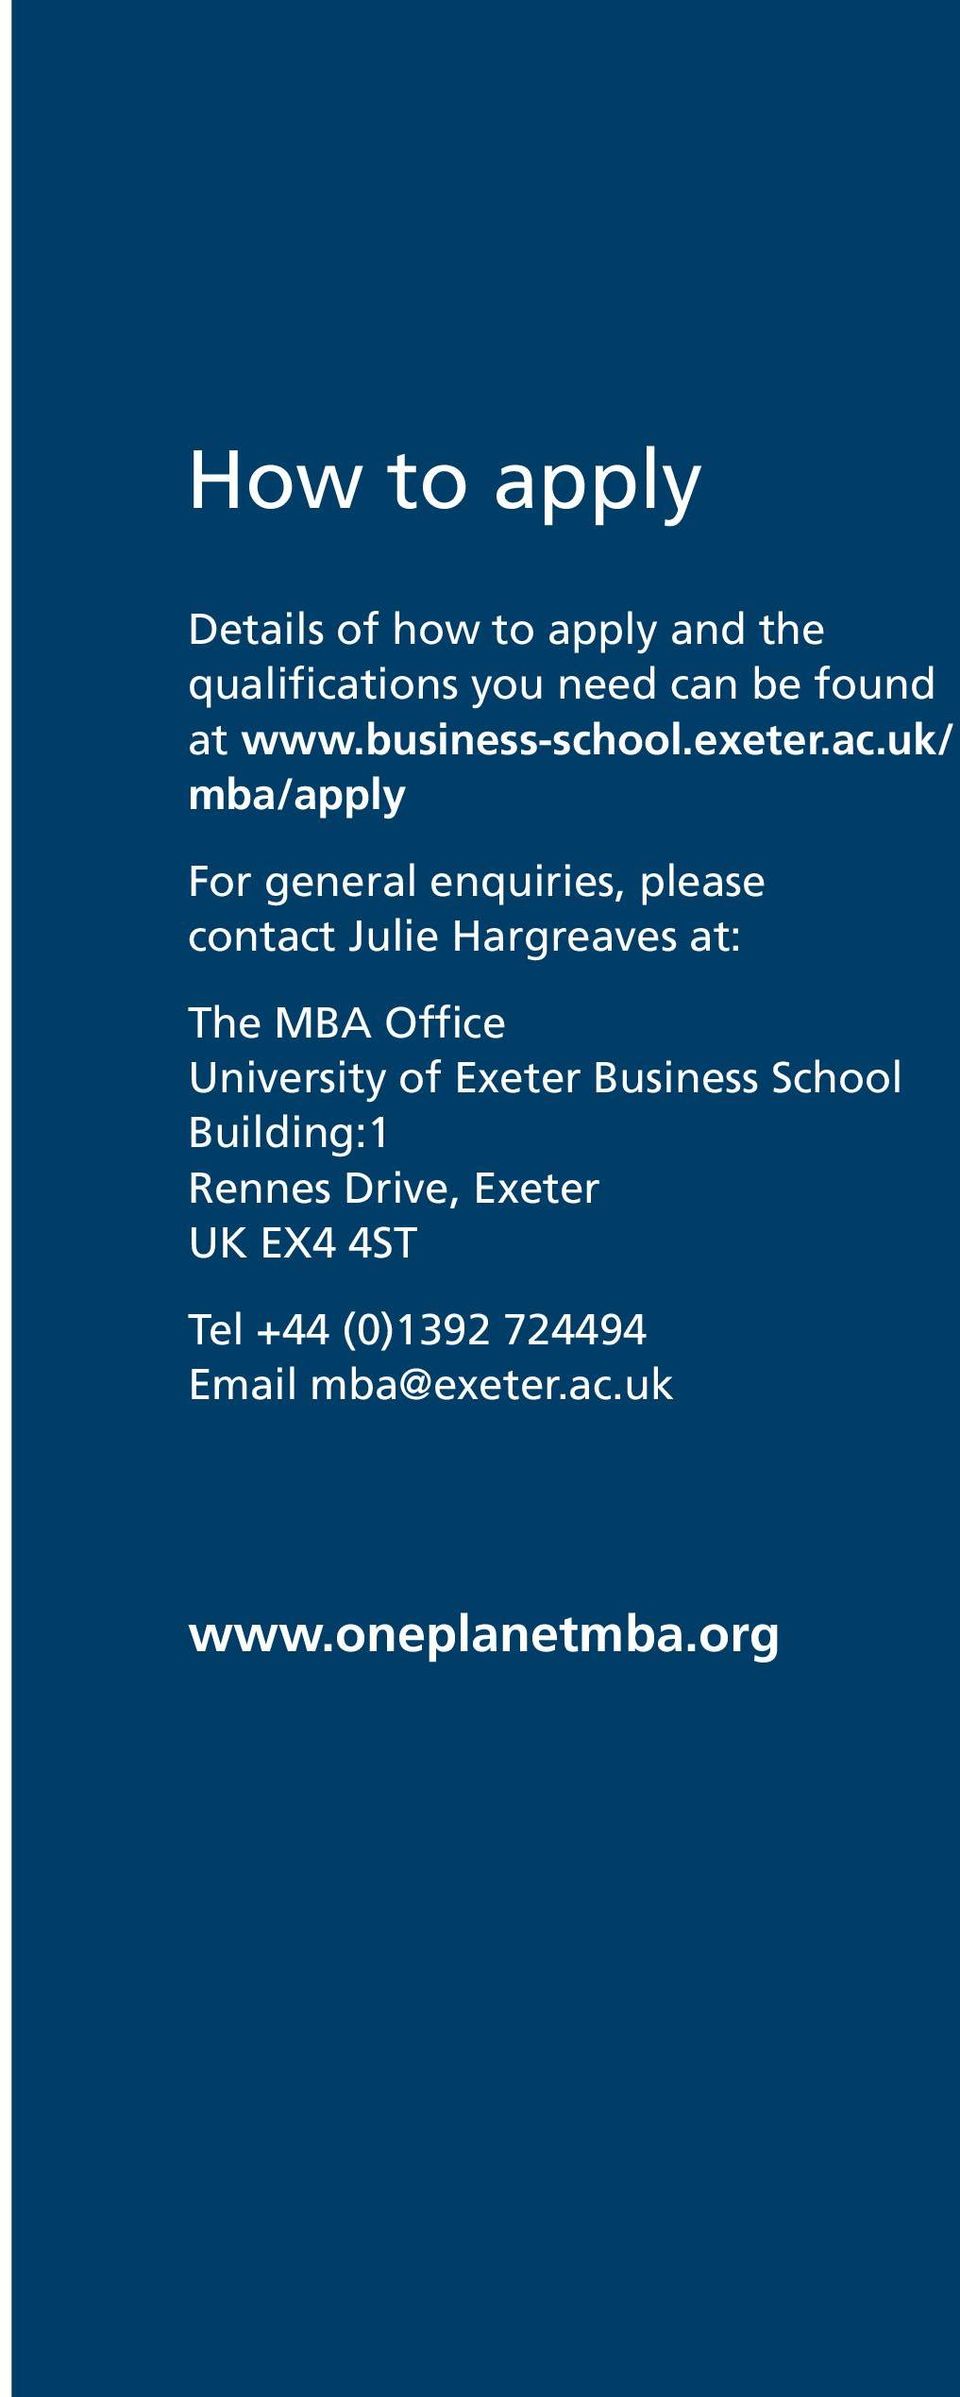 mba@exeter.ac.uk www.oneplanetmba.org I manage resources, just like many managers, but mine are physical, tangible, environmental resources.